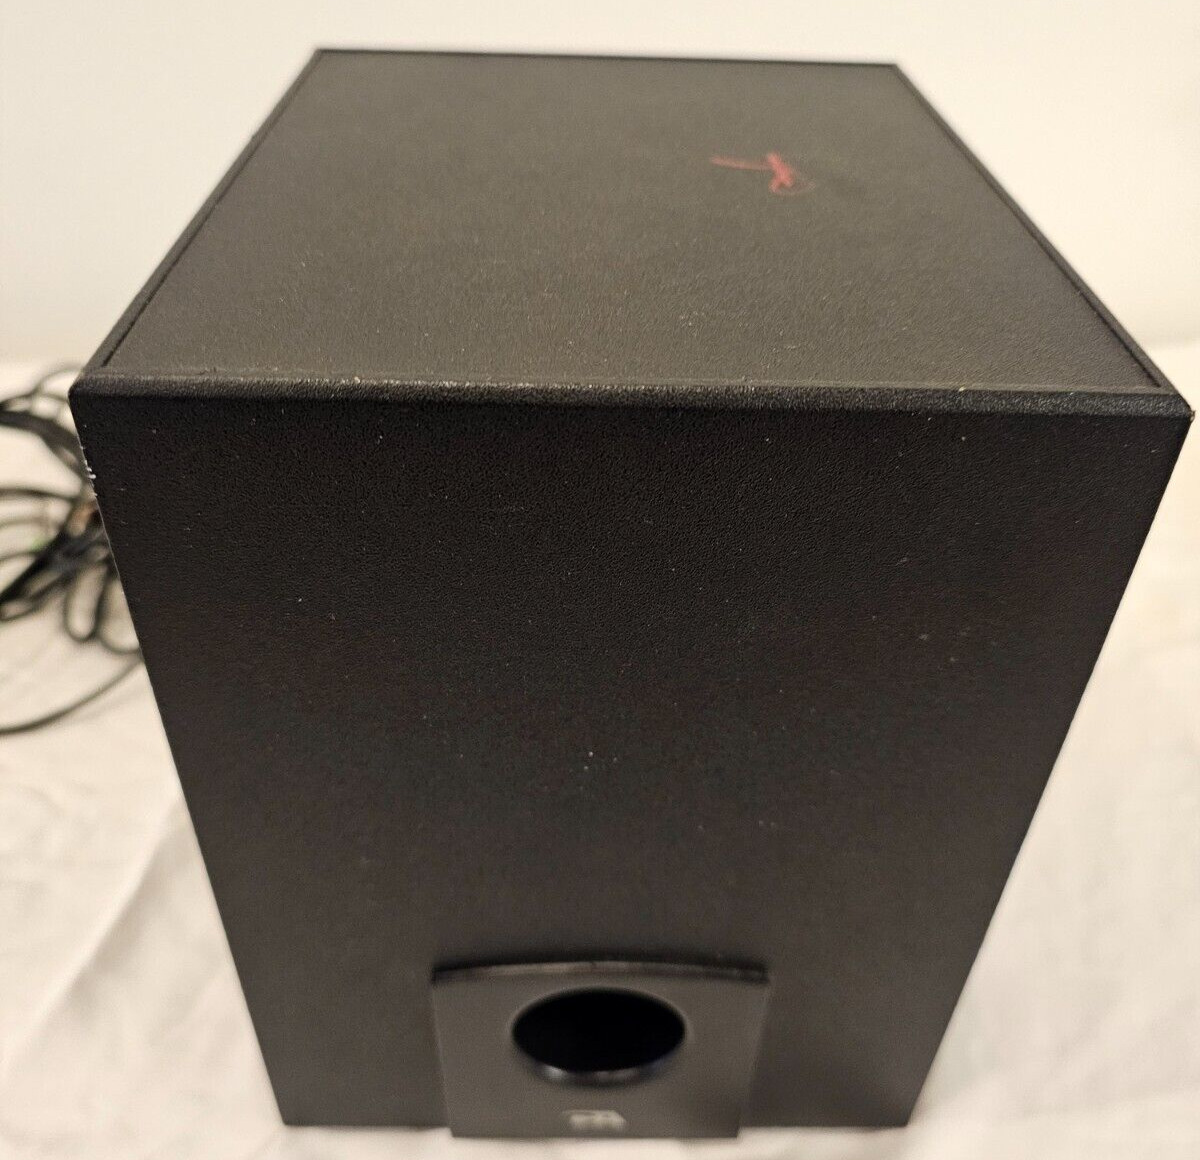 Cyber Acoustics CA-3908 2.1 Multimedia Speaker System with Subwoofer (C1)